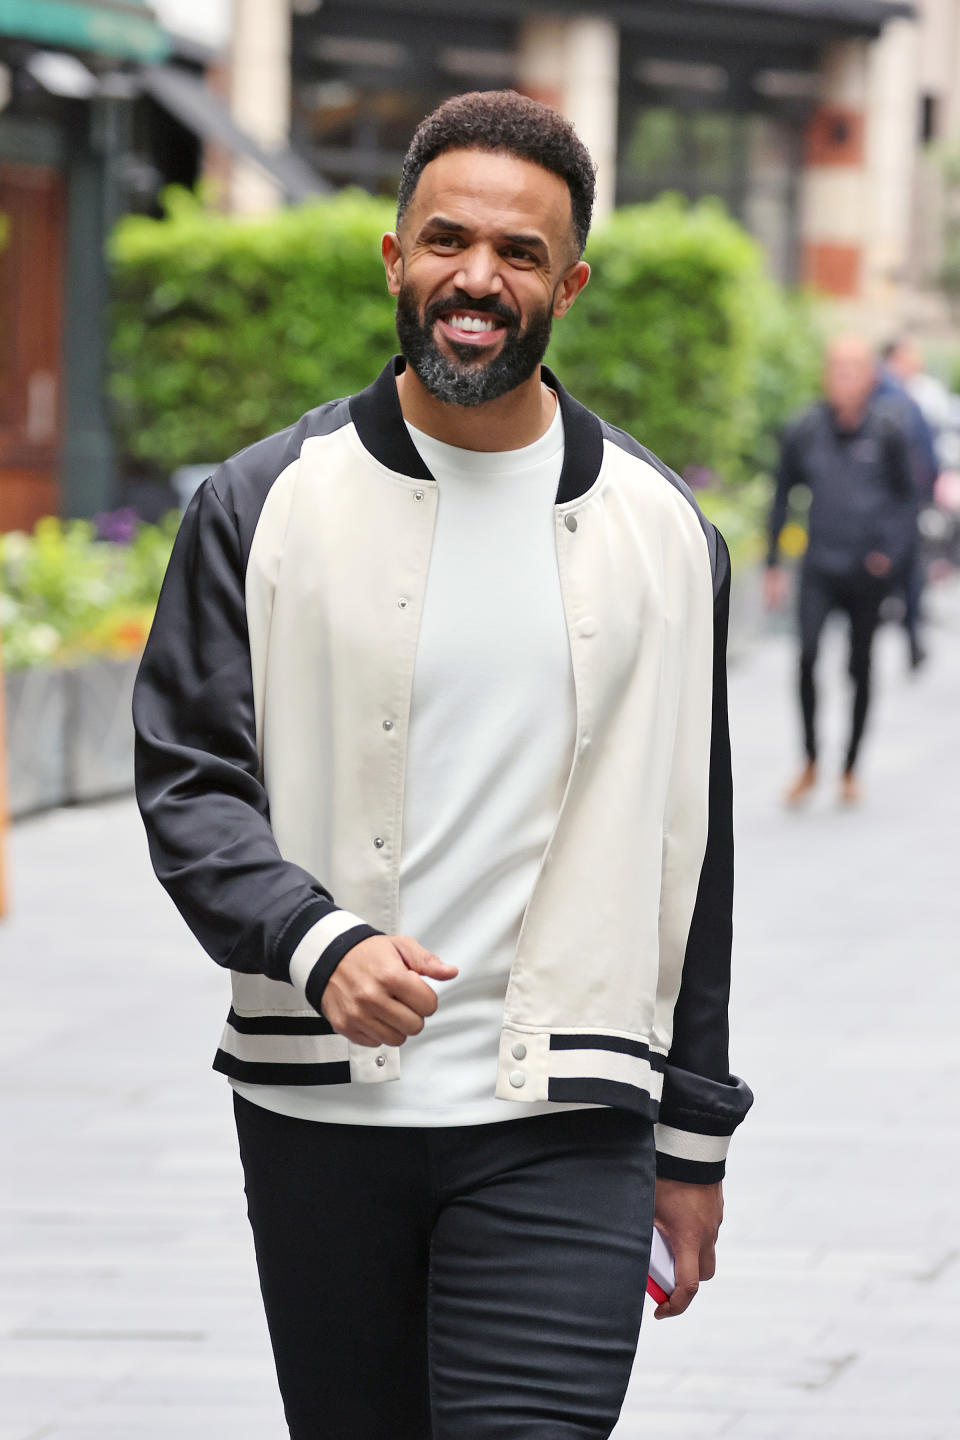 Craig David smiles while walking outside wearing a white t-shirt, black jeans, and a black-and-white varsity jacket